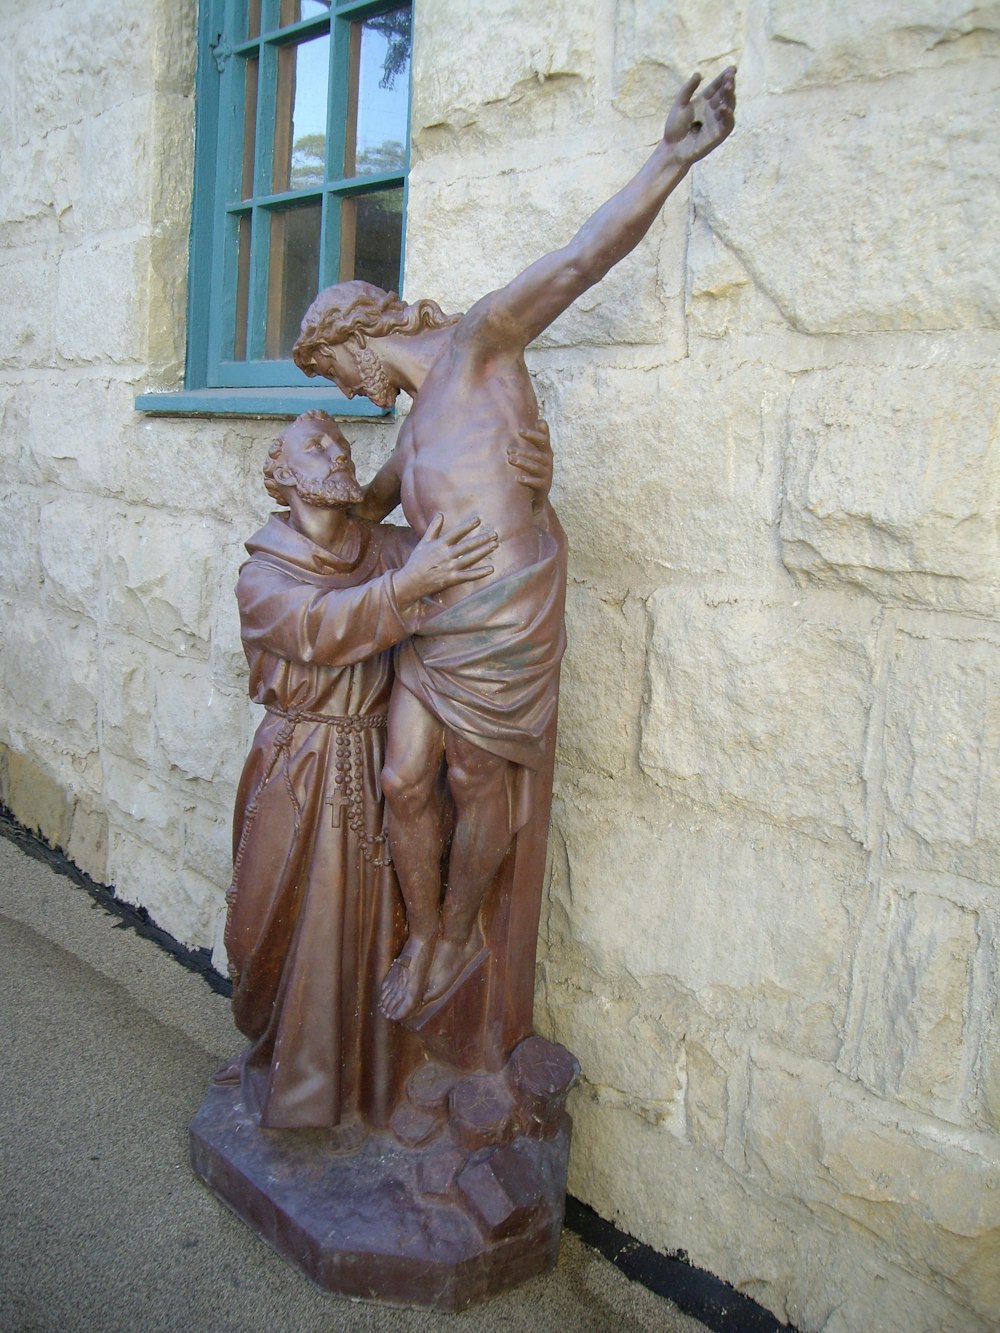 A statue outside of a church.